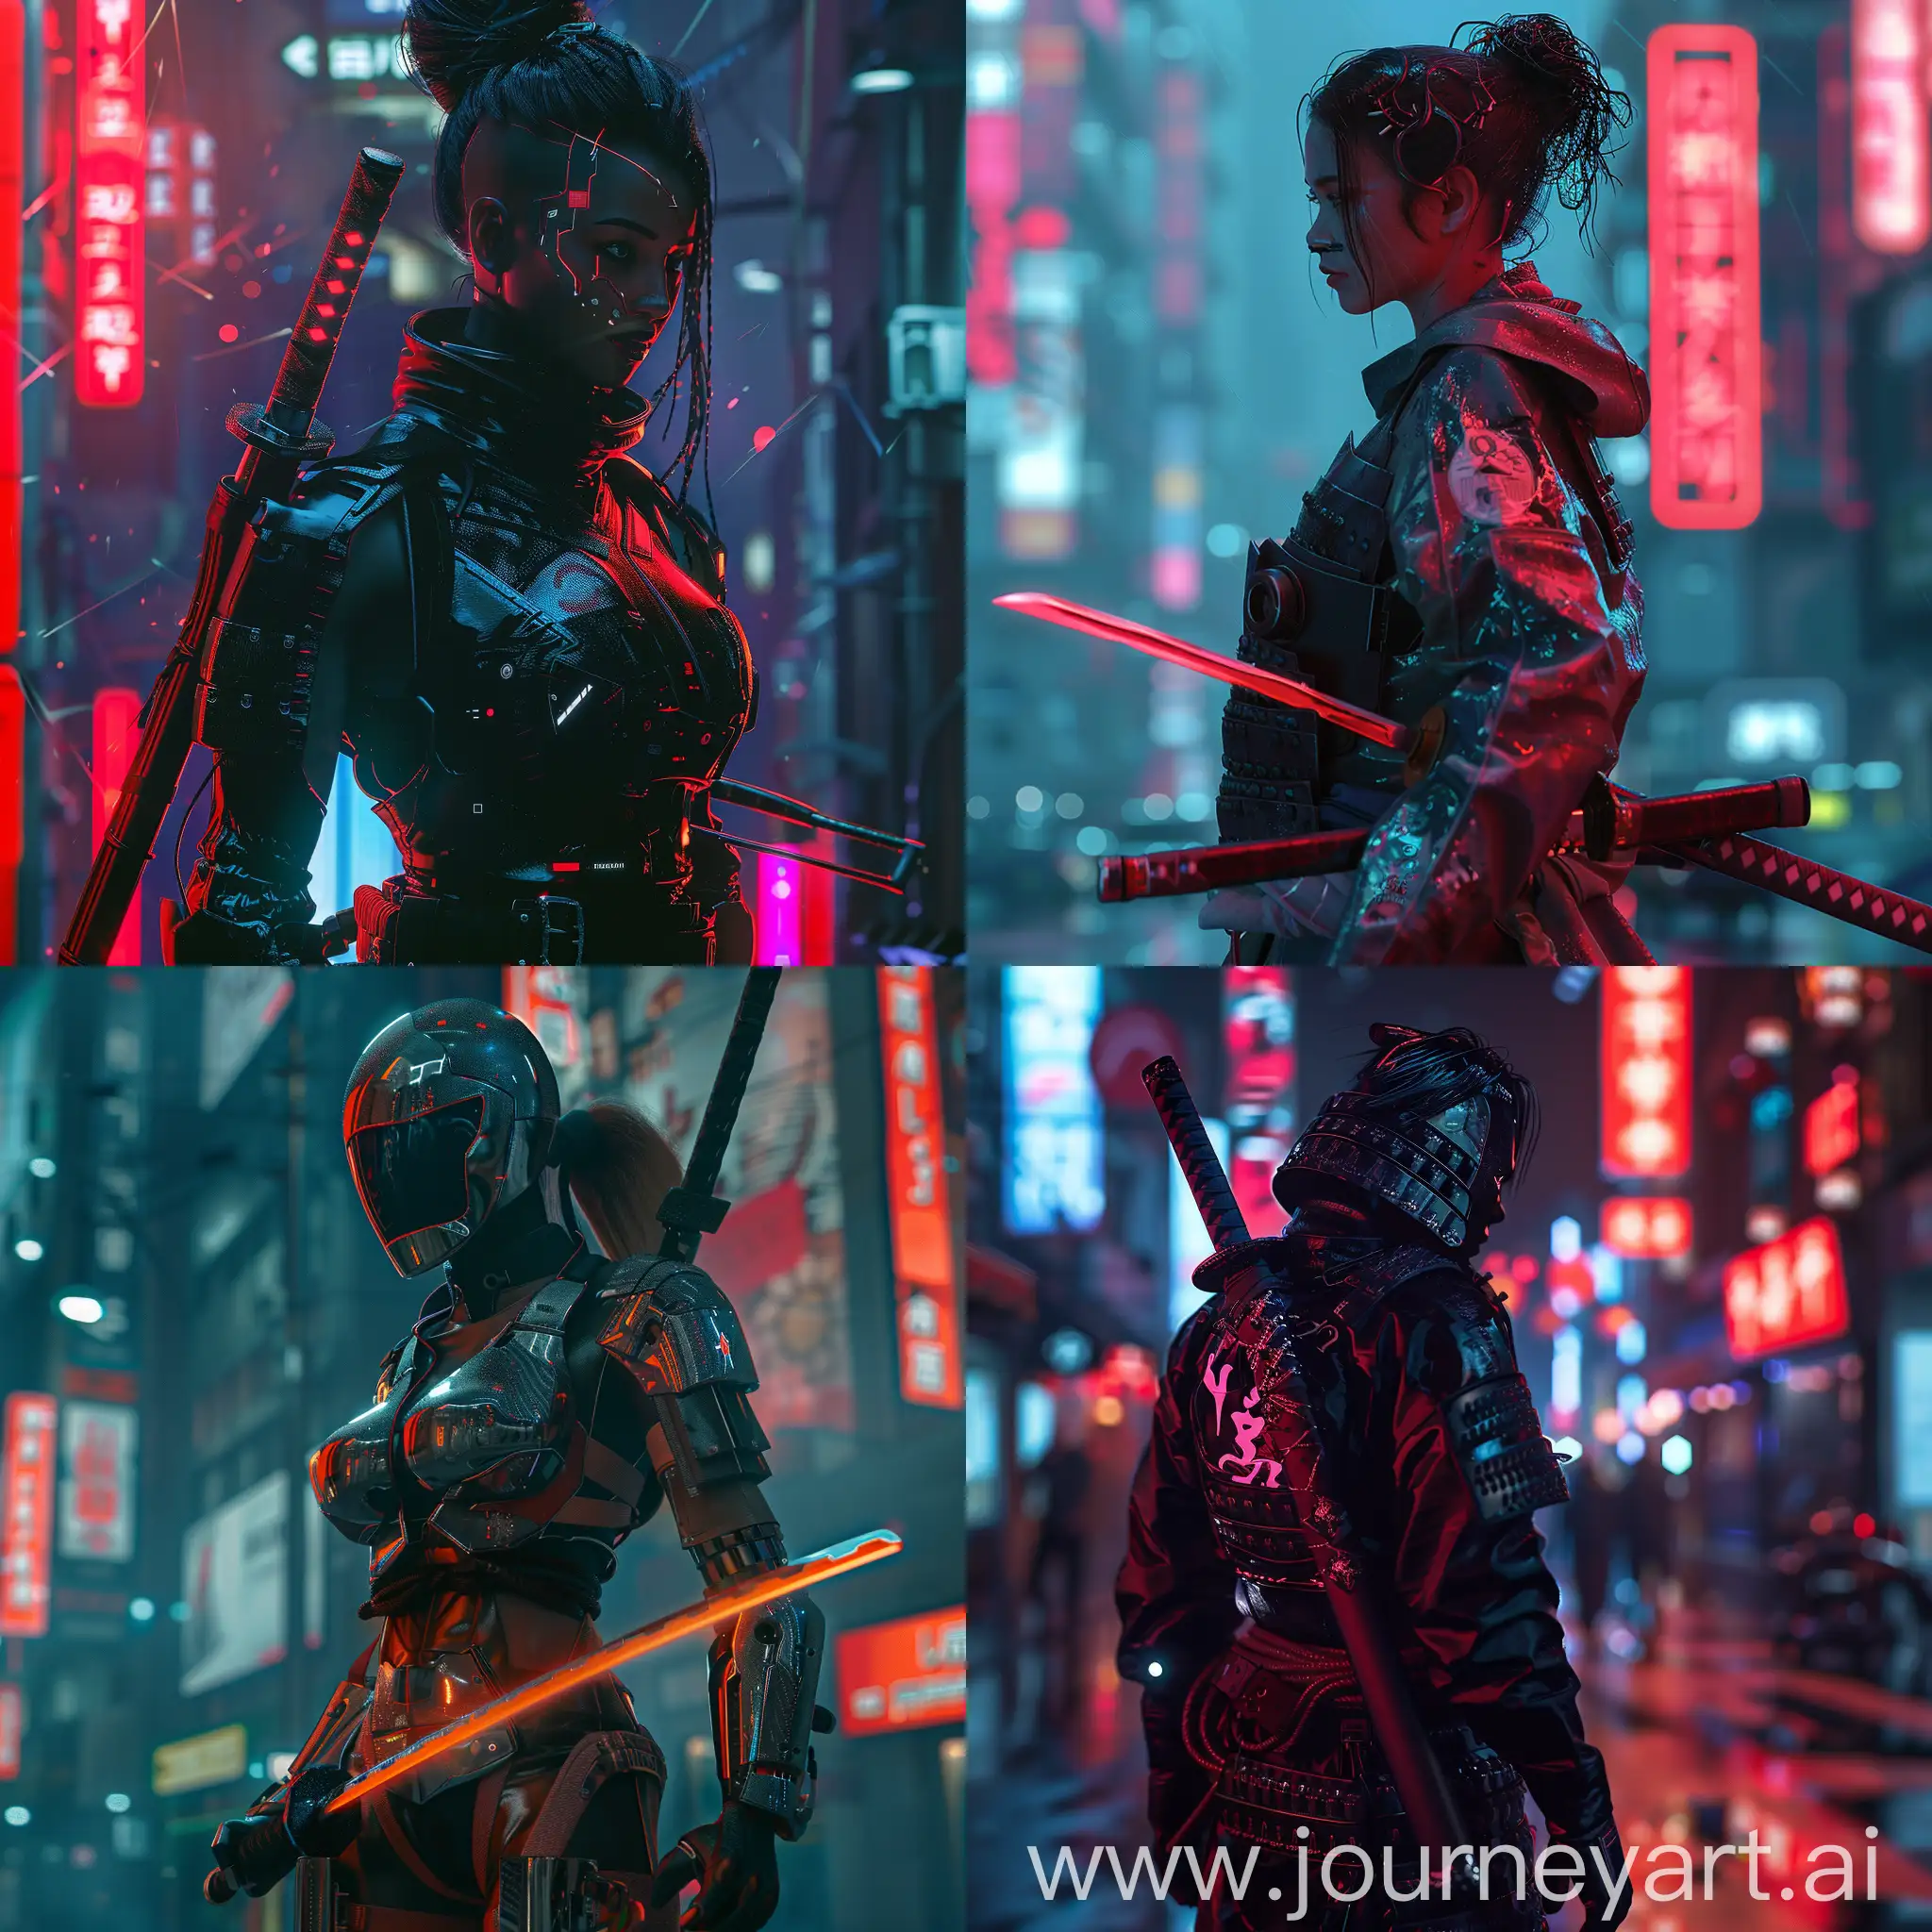 Samurai-Warrior-in-Cyberpunk-Style-with-Realistic-Details-and-Beautiful-Lighting